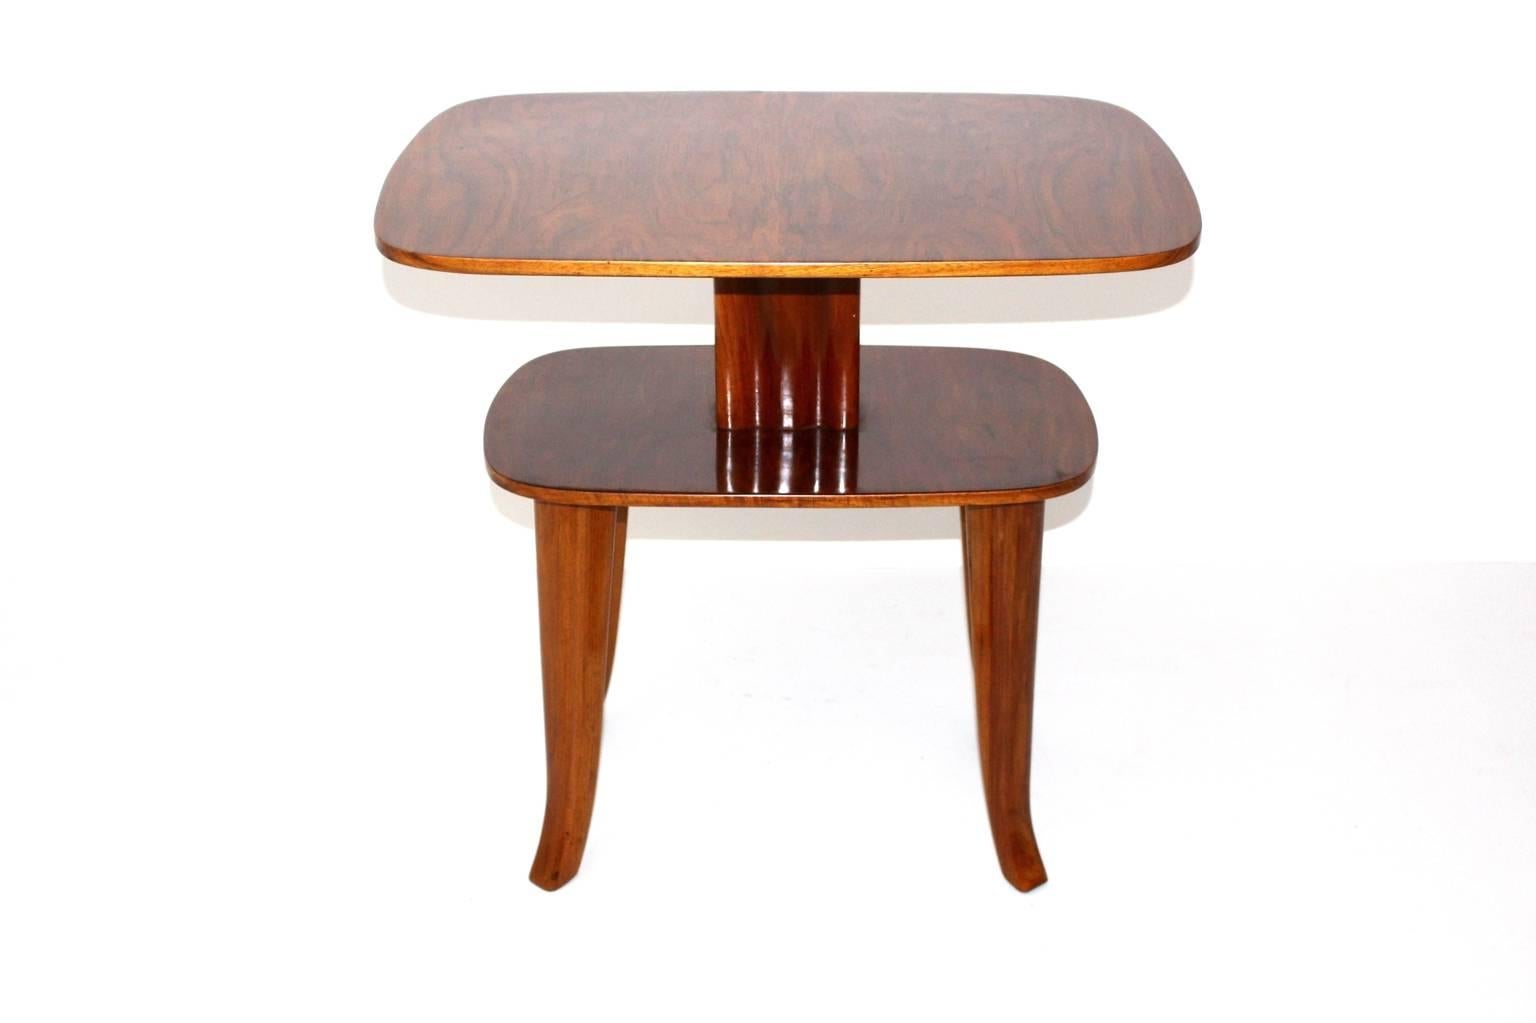 Art Deco vintage side table or occasional table or coffee table in the style of Josef Frank, c. 1925 Austria.
An amazing side table in the style of Josef Frank made from solid walnut.
While the base was made out of solid walnut , the top was